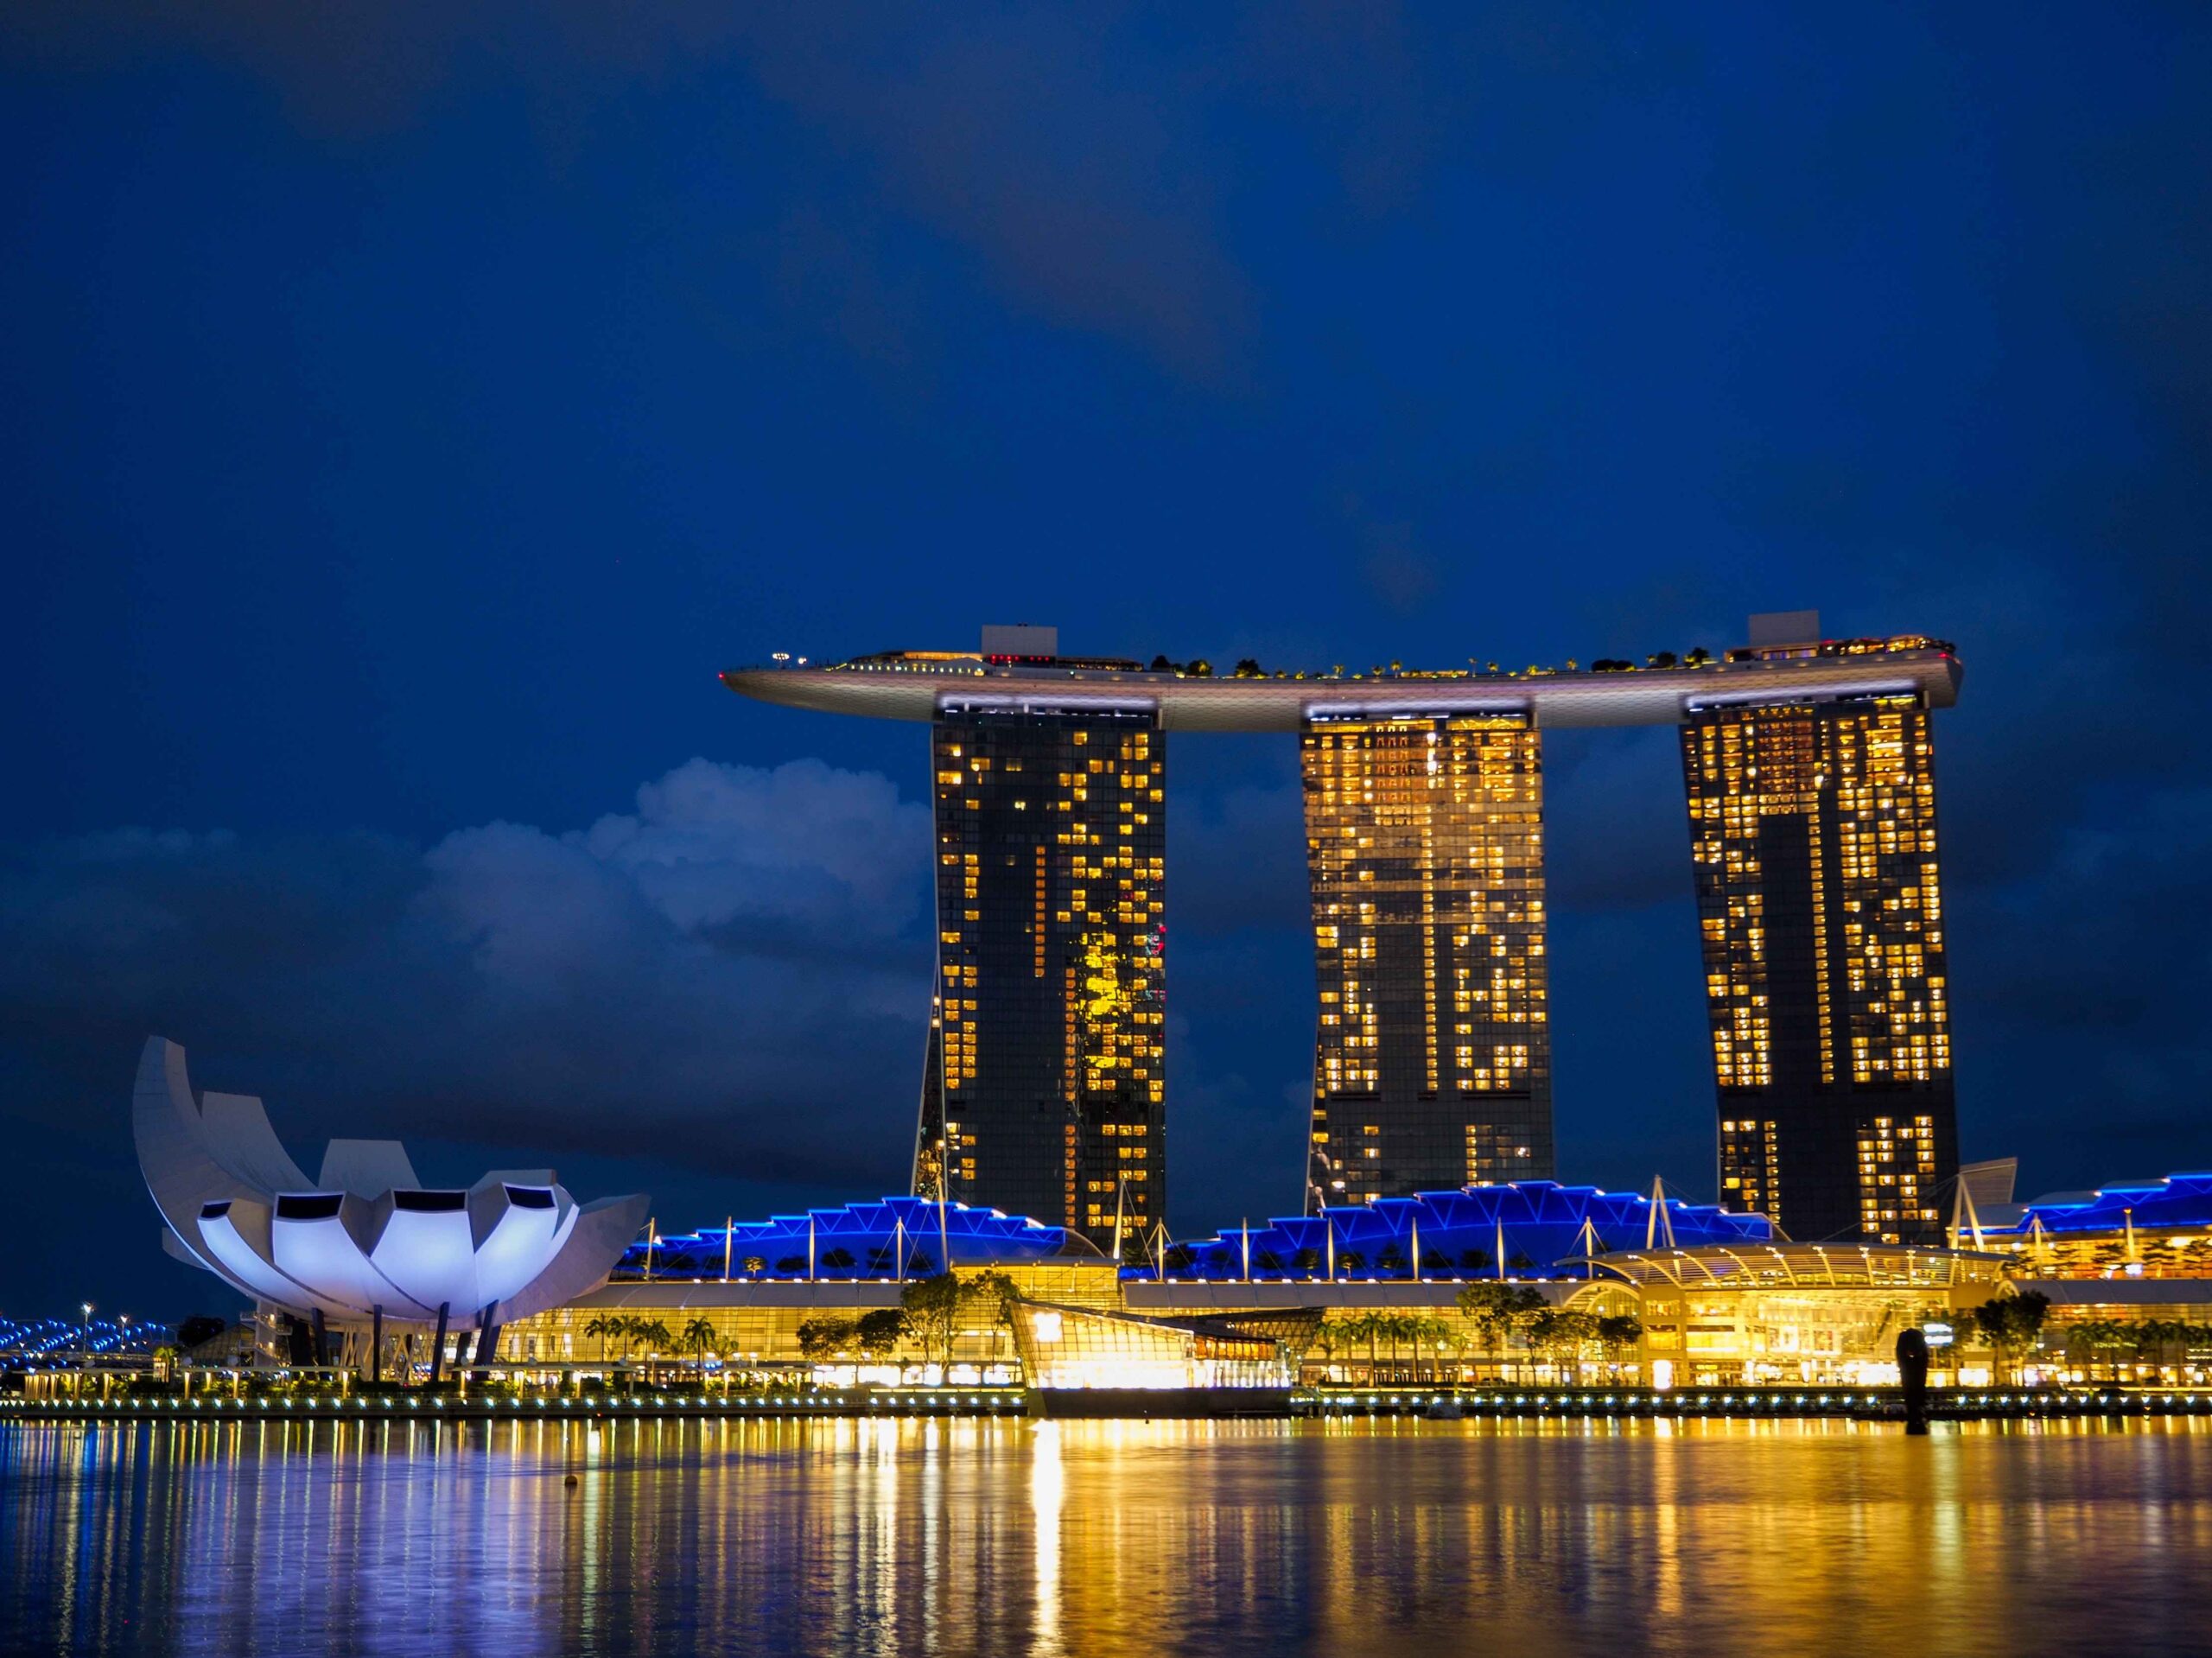 From Ground to Clouds: A Look at the Iconic Marina Bay Sands’ SkyPark